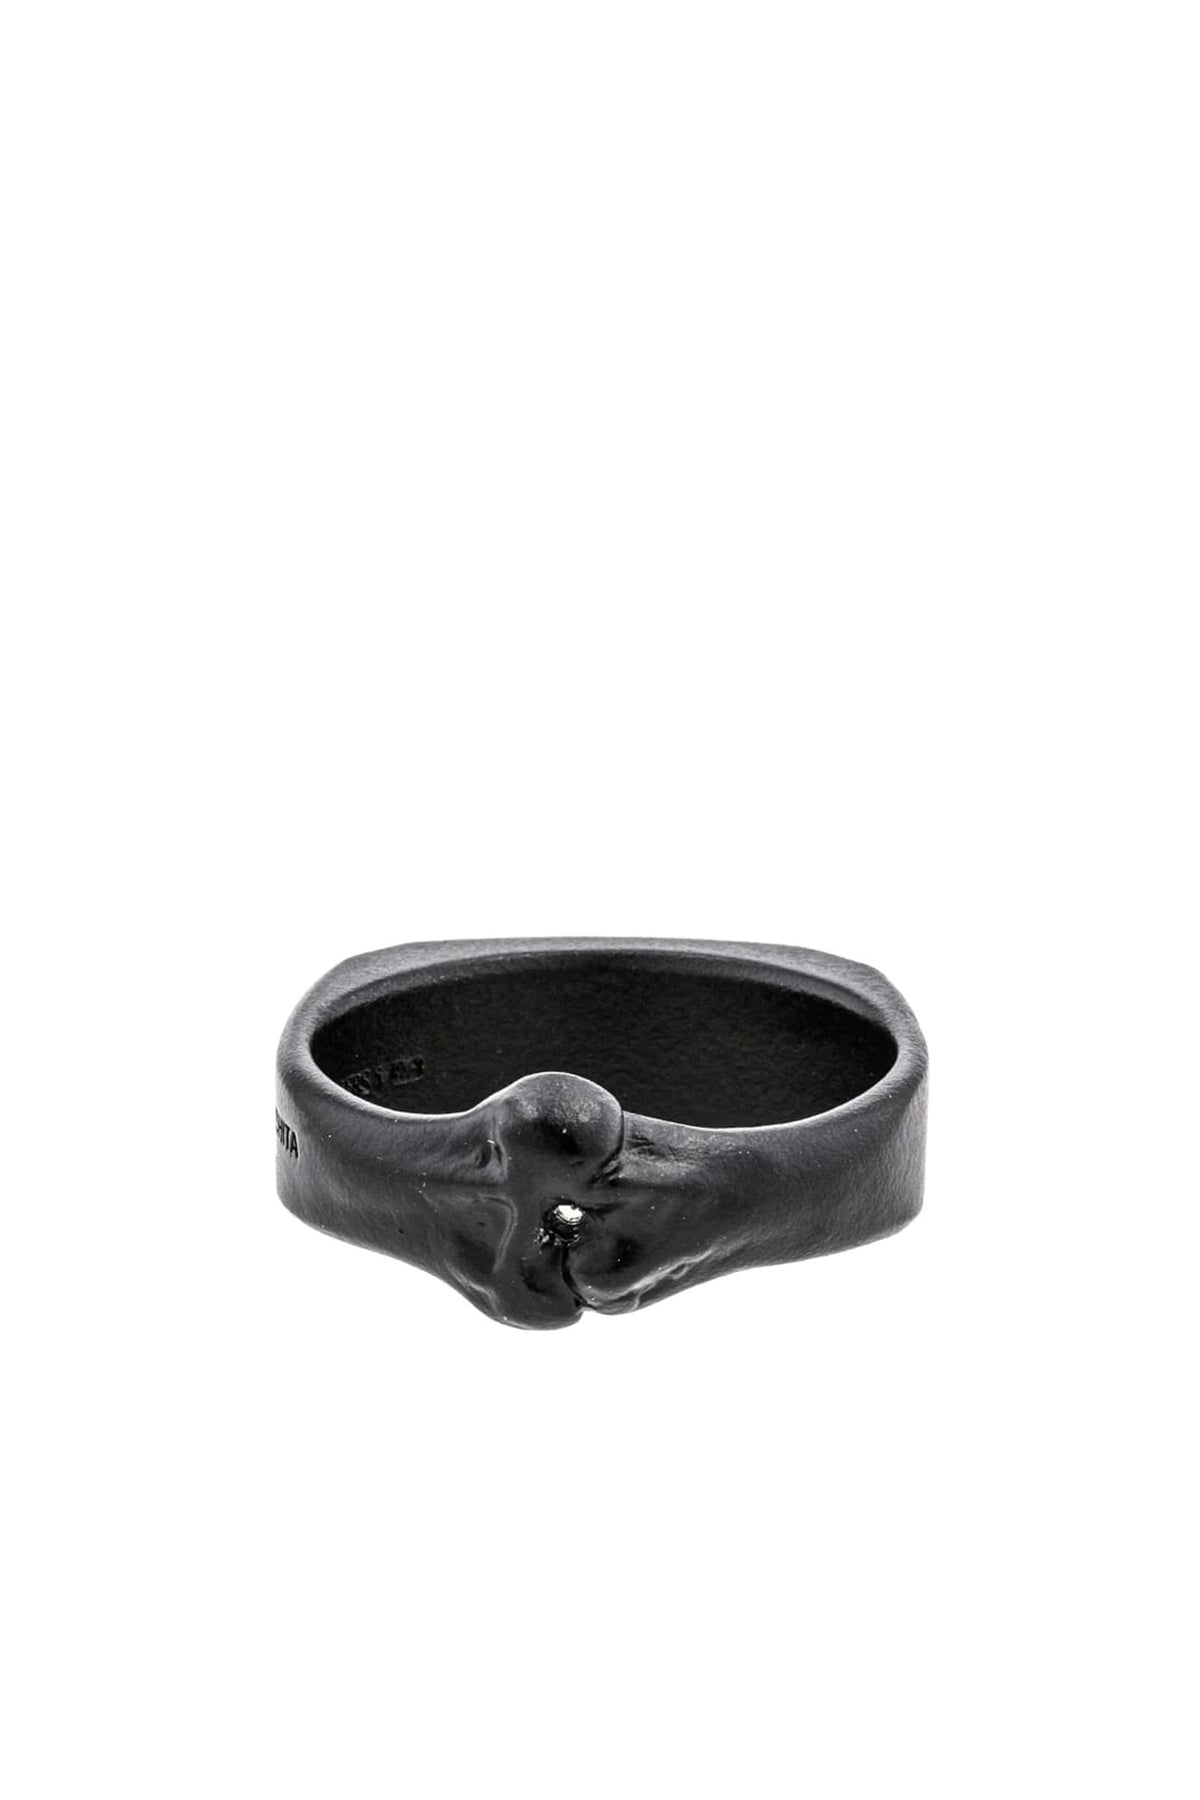 BORN SHAPED SIGNET RING.-S- / BLK